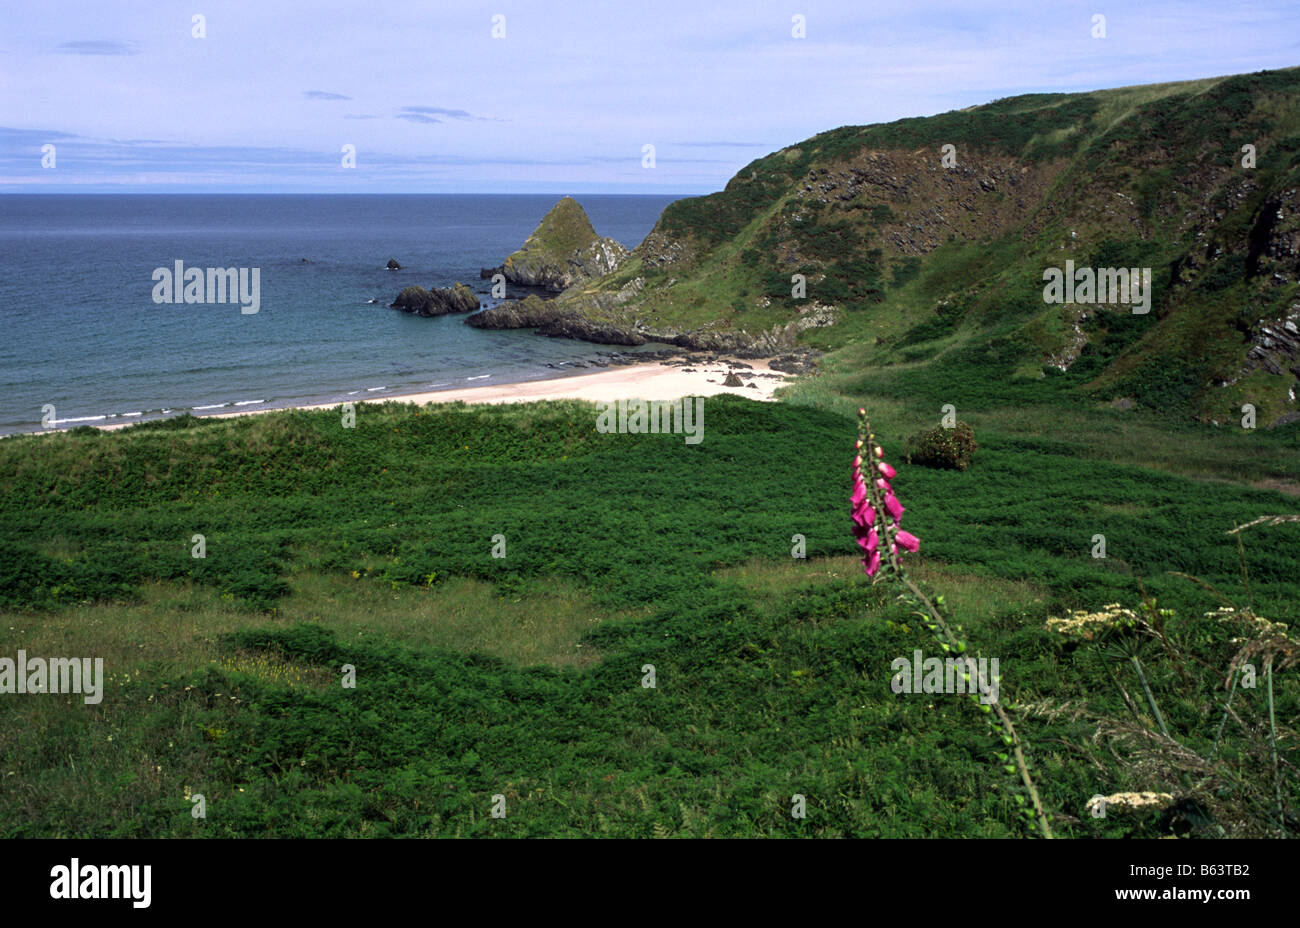 White sands of unspoilt Sunnyside Beach with grassy cliffs rocky outcrops bracken on the coast path near Cullen Moray Firth North East Scotland Stock Photo